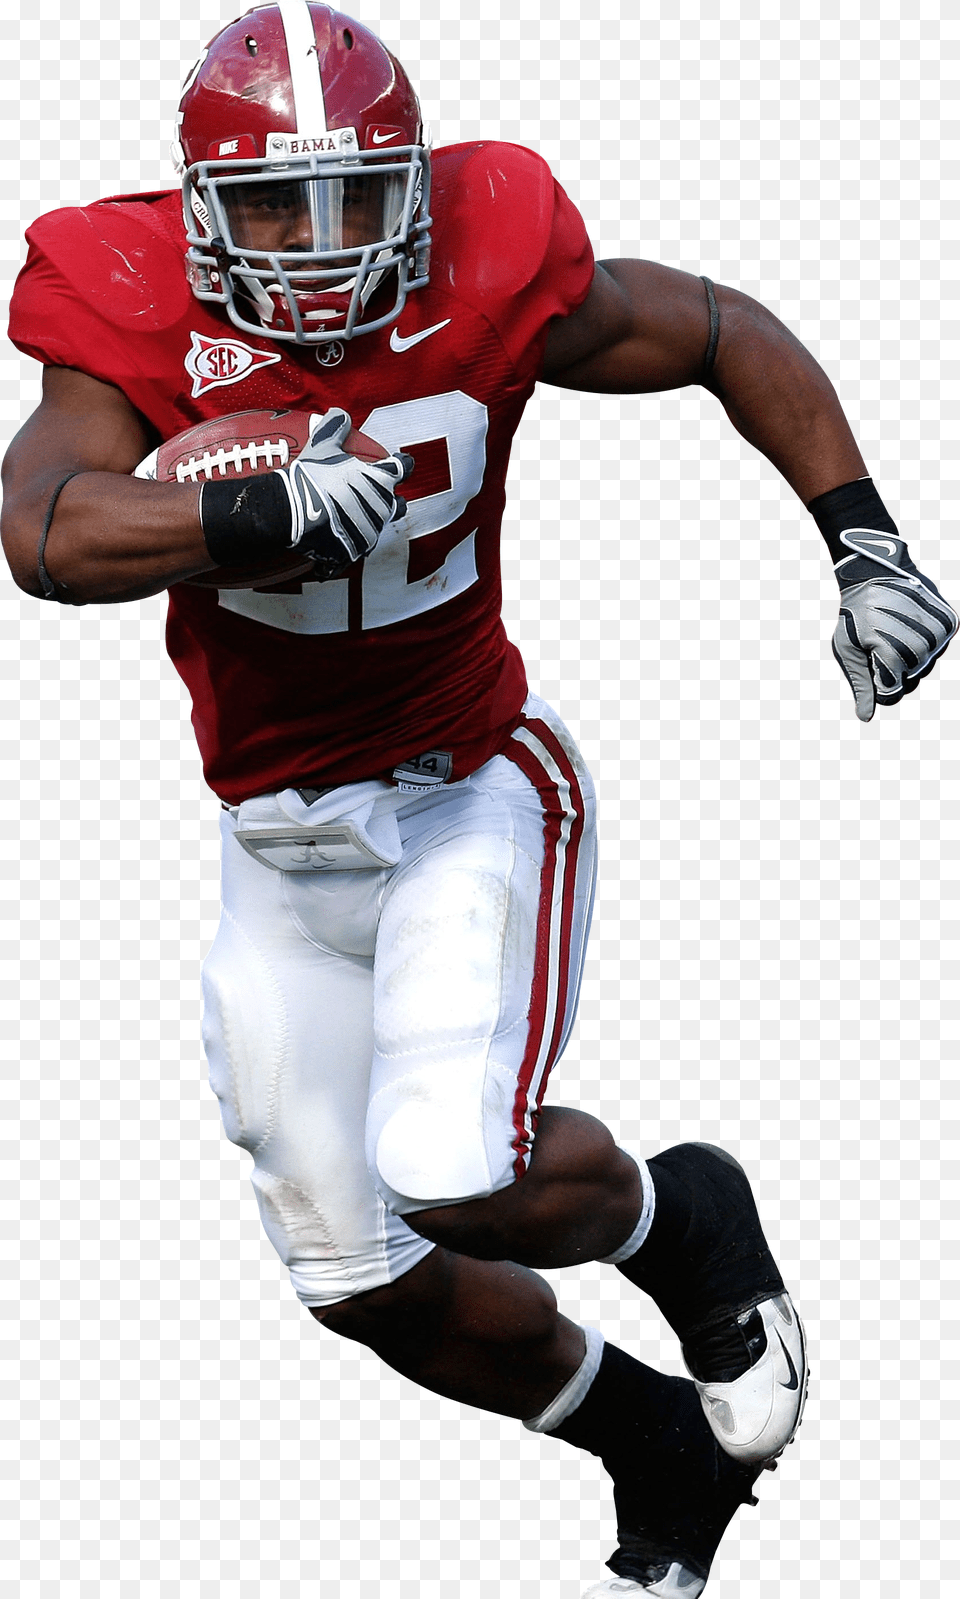 The Standard Alabama Football Player Transparent, Helmet, Clothing, Glove, Playing American Football Free Png Download